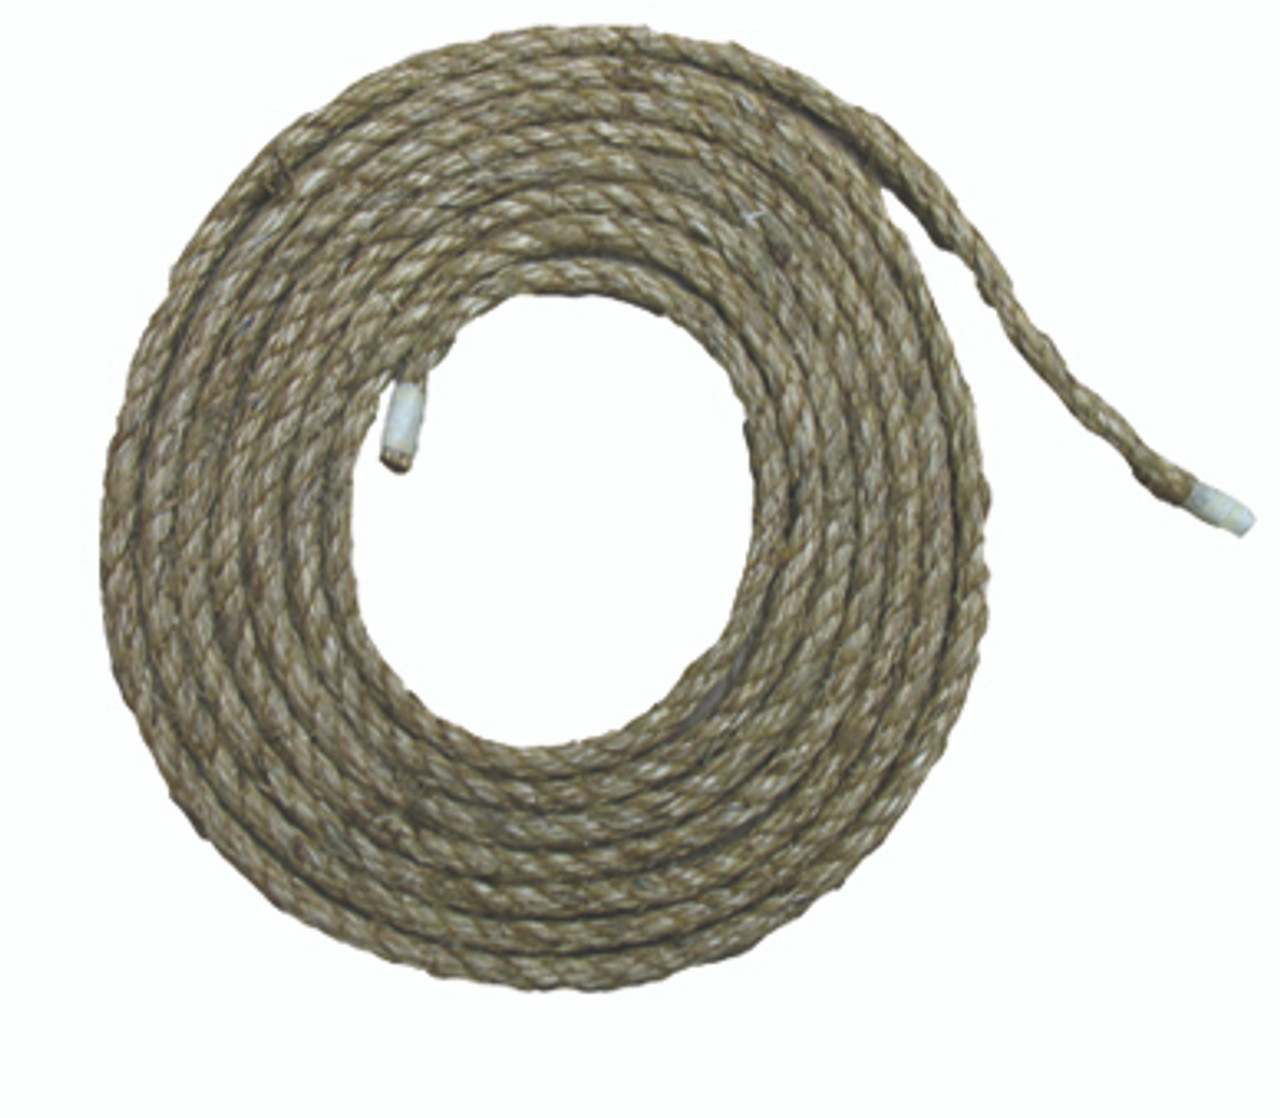 Hastings 3635 Manila Rope - Each - Western Safety